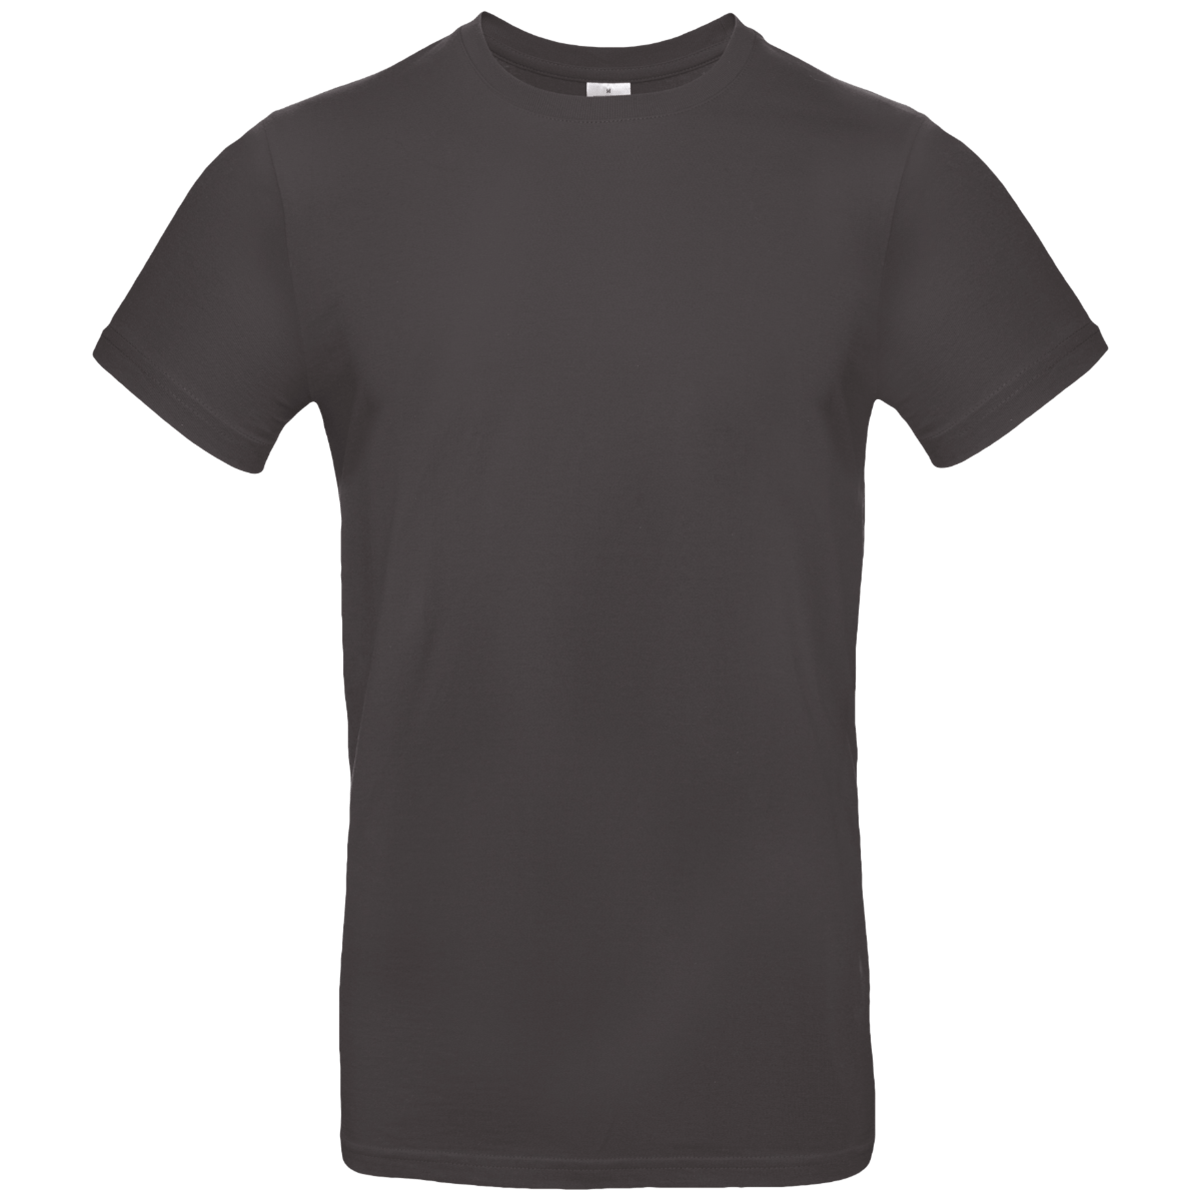 Tee-Shirt Homme Personnalisable Sur Tunetoo Used Black